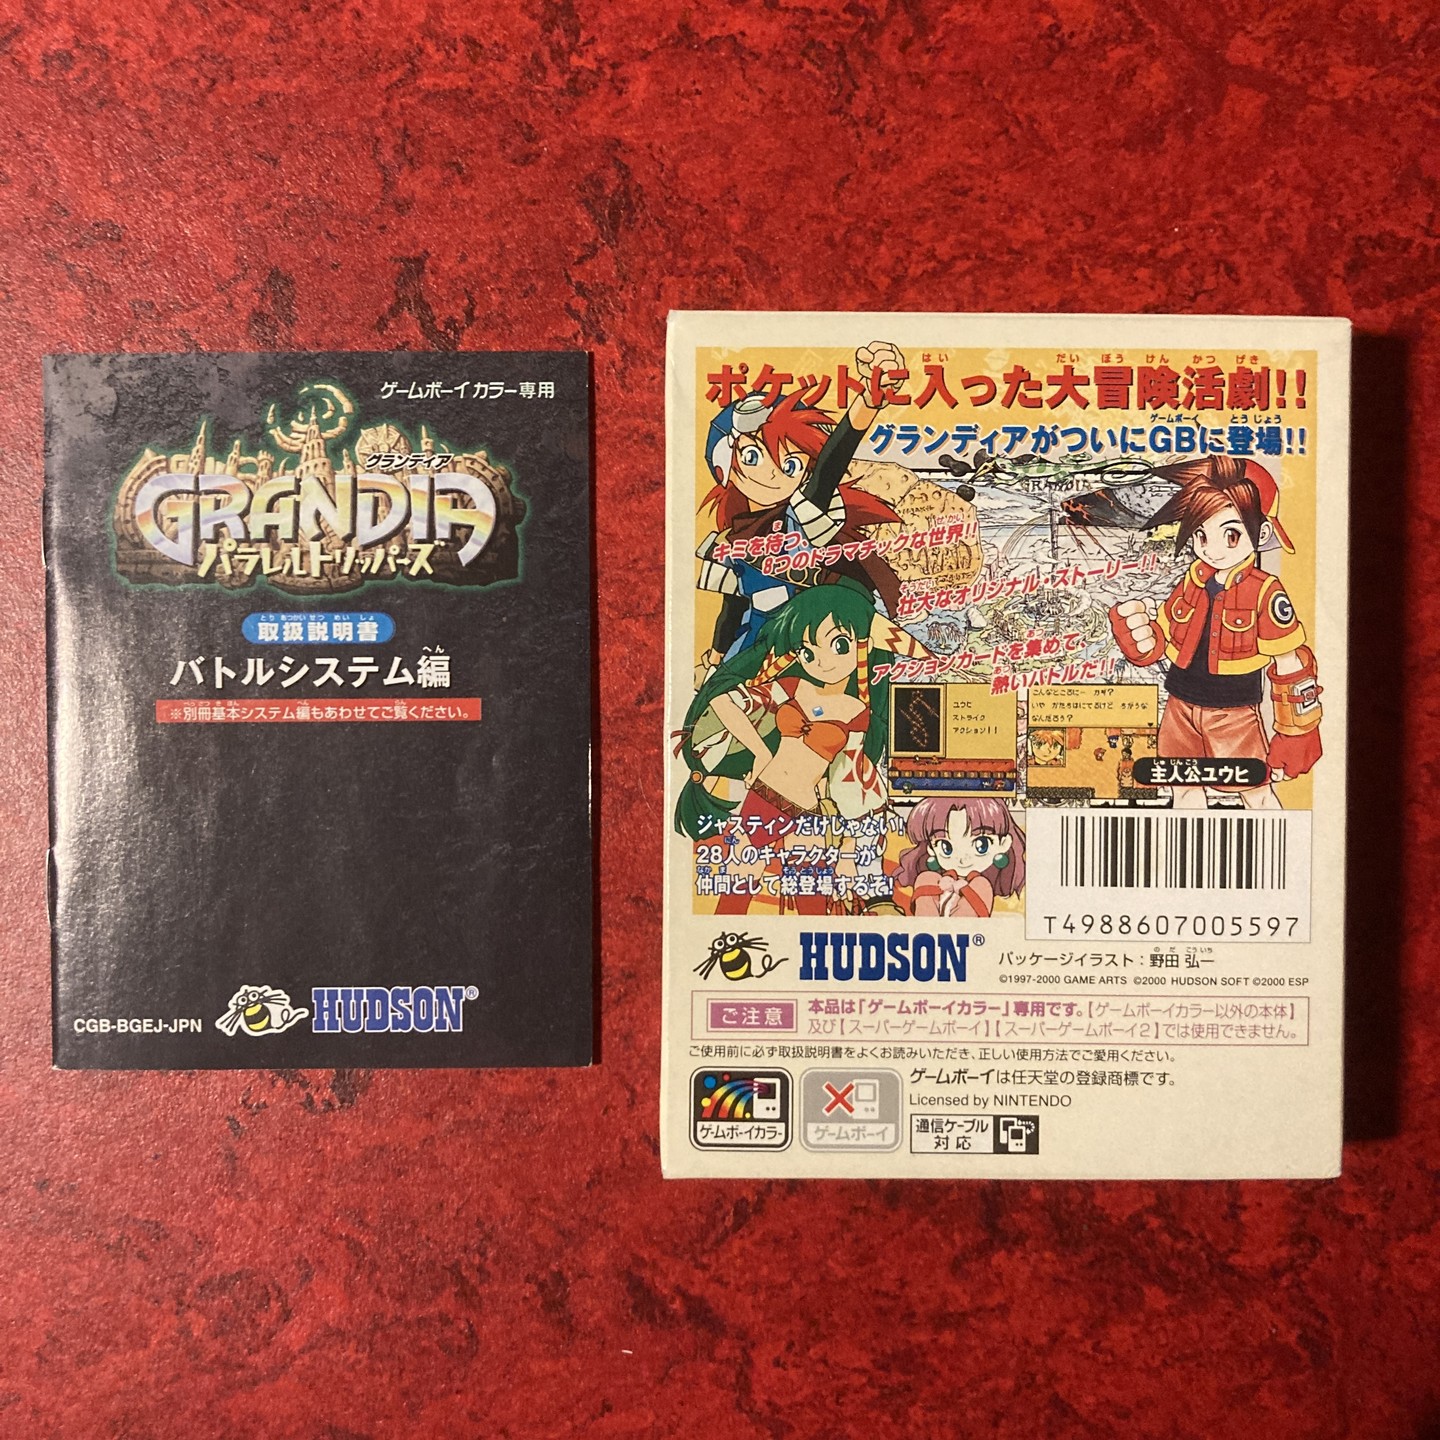 Grandia : Parallel Trippers